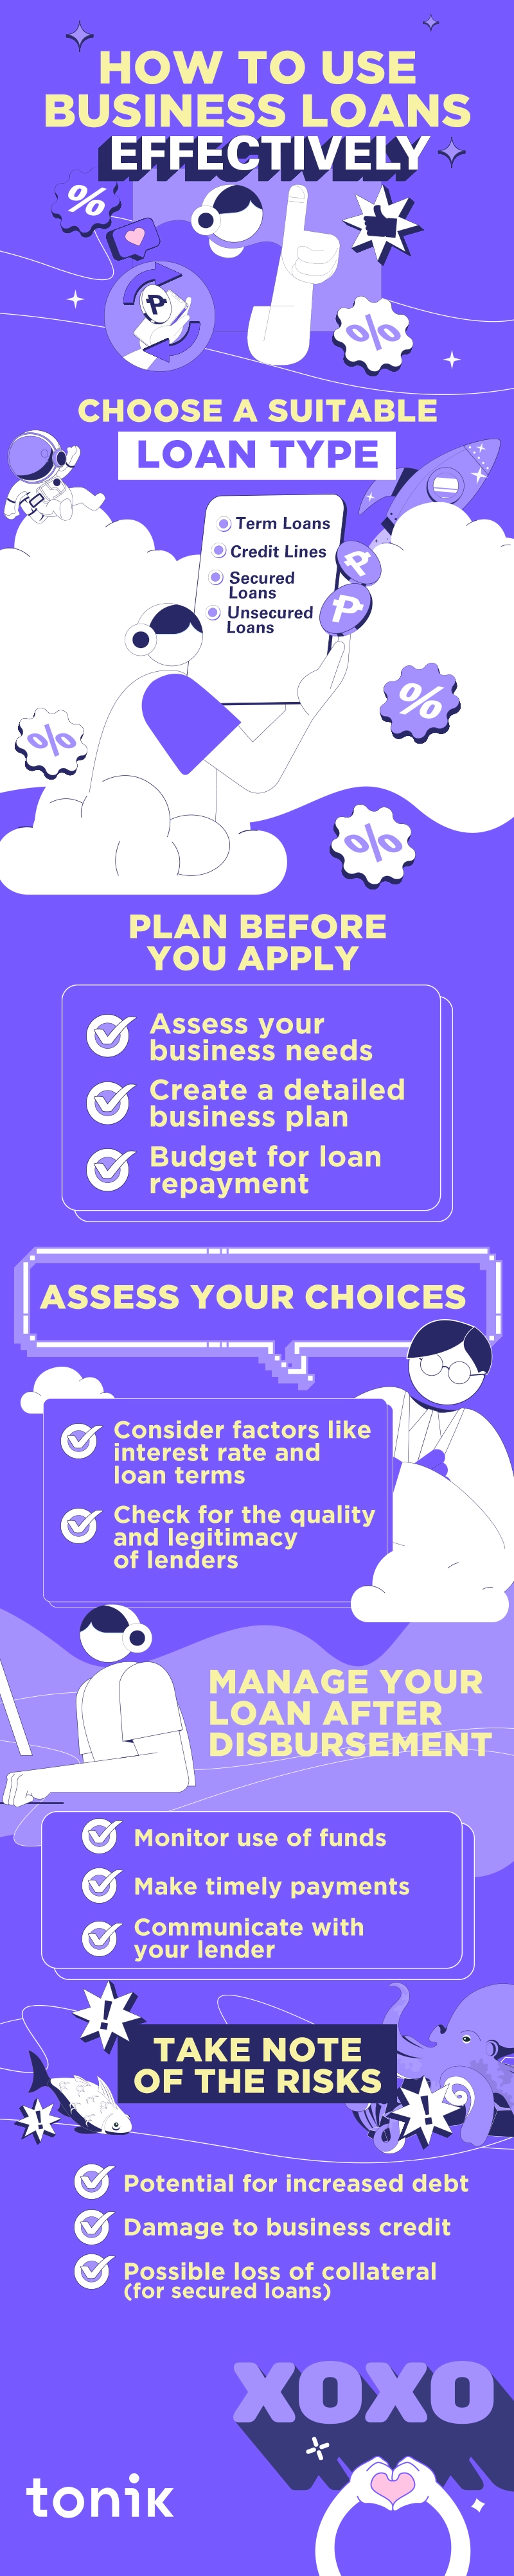 infographic that shows how to how to use business loans effectively